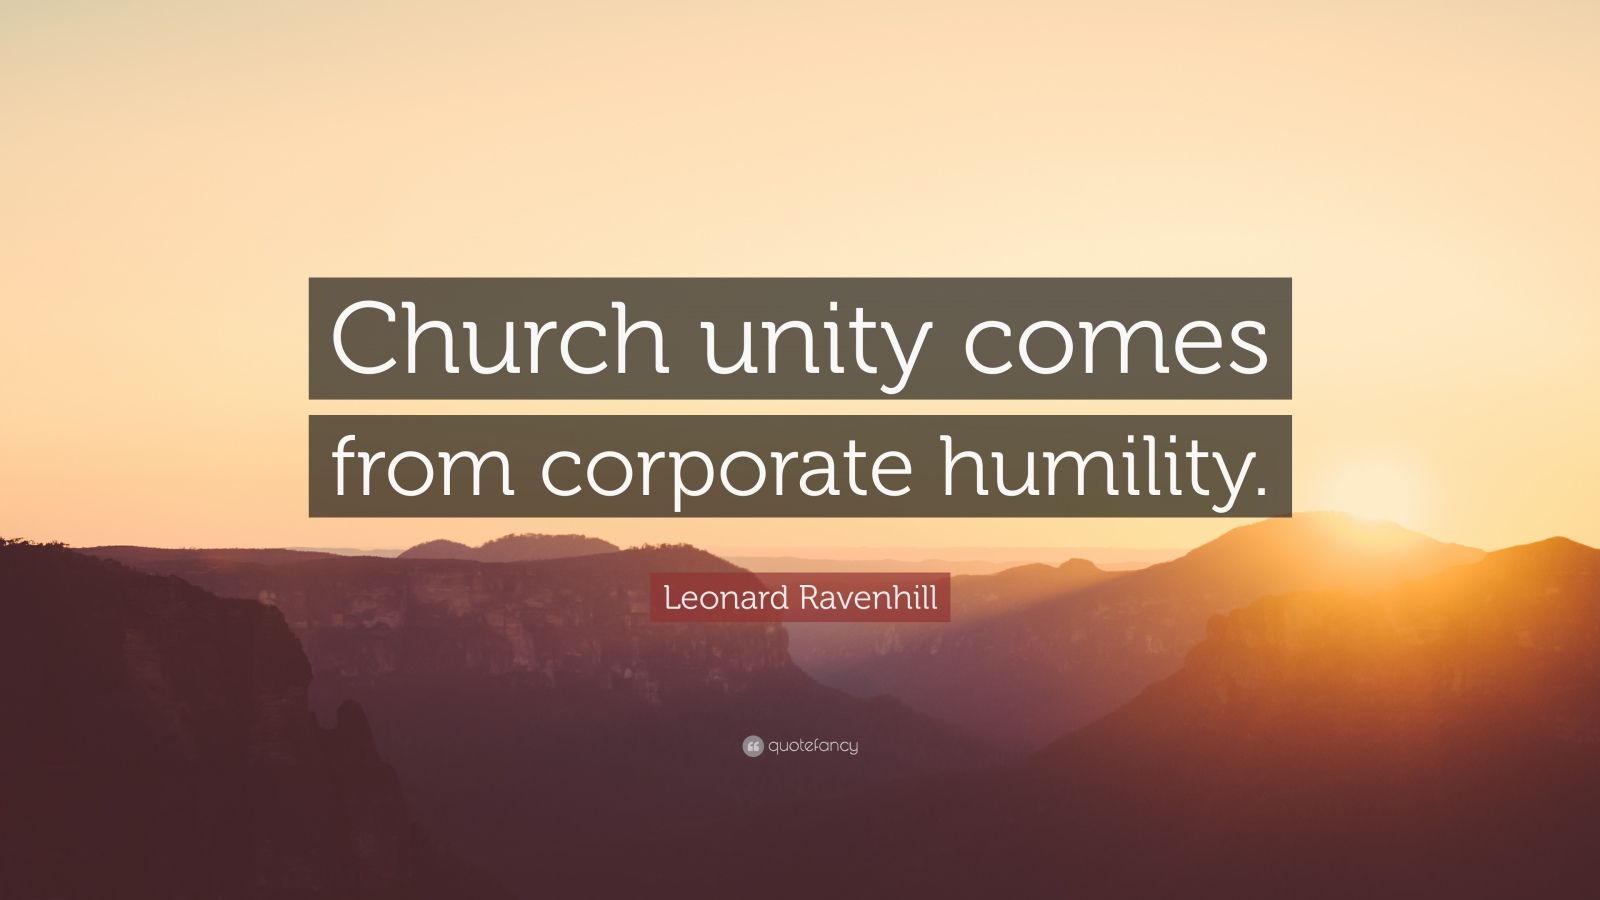 Leonard Ravenhill Quote “Church unity comes from corporate humility.”